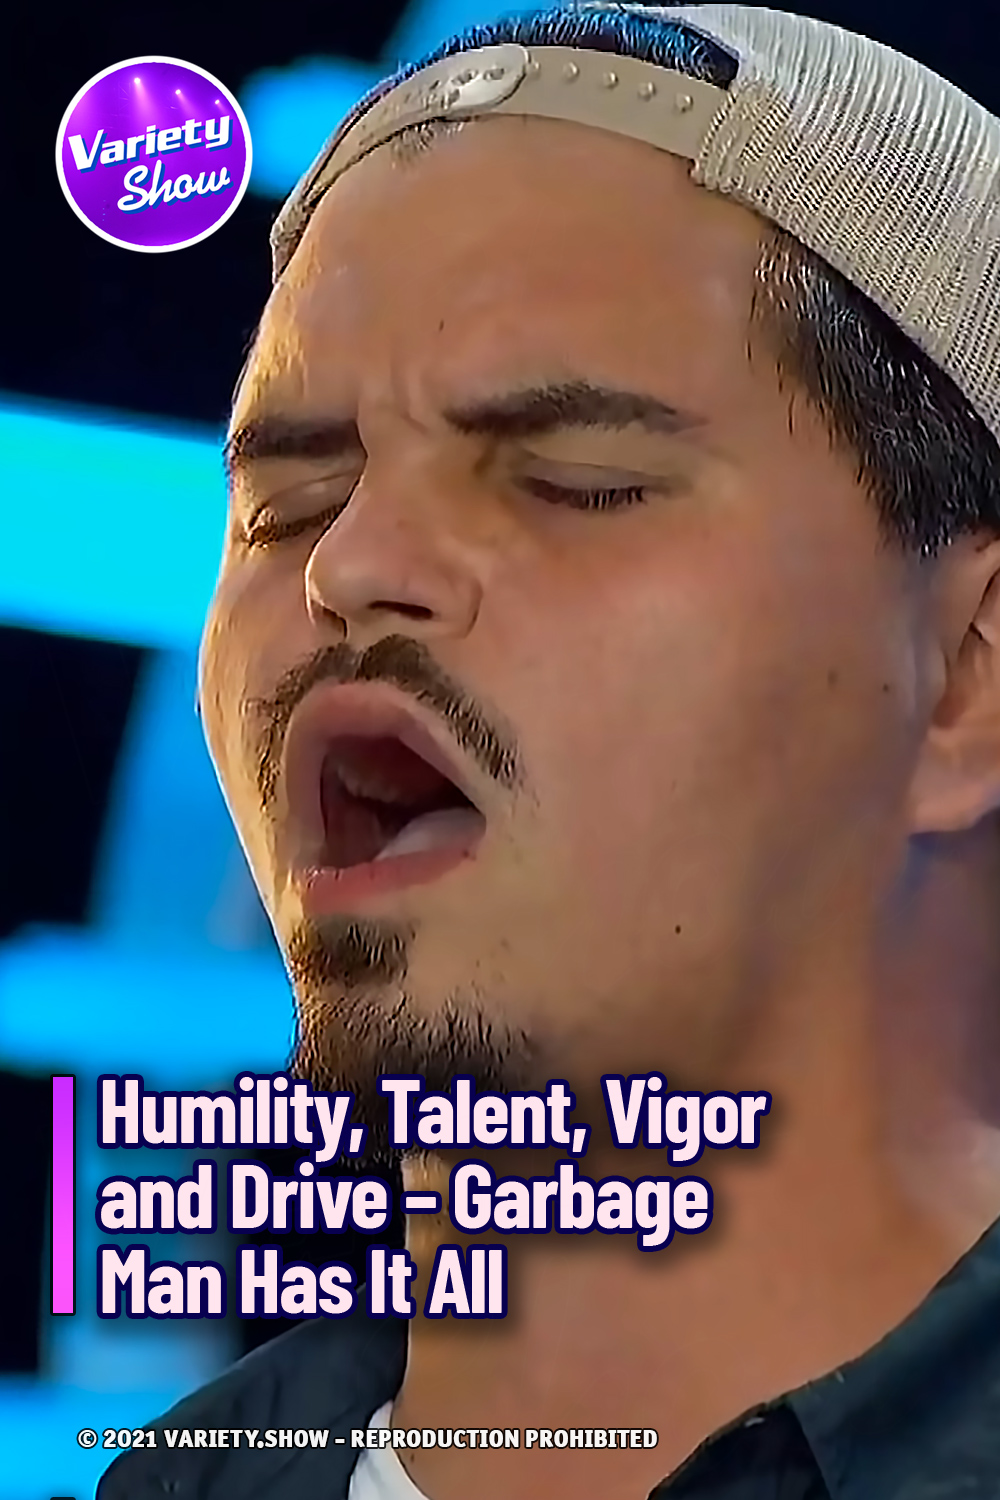 Humility, Talent, Vigor and Drive - Garbage Man Has It All